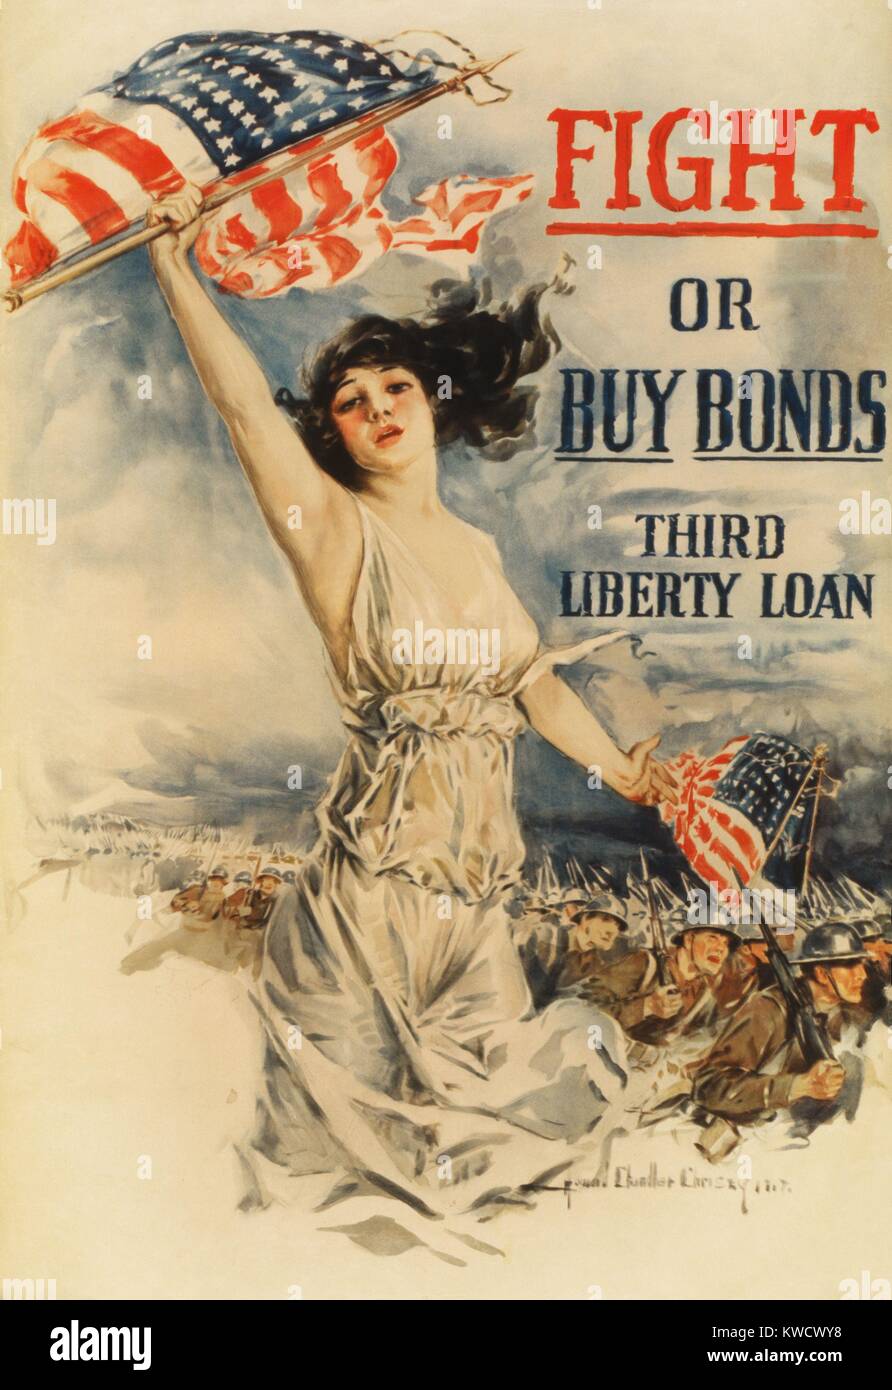 FIGHT OR BUY BONDS--THIRD LIBERTY LOAN. American World War 1 poster by Howard Chandler Christy 1917 (BSLOC 2017 1 59) Stock Photo